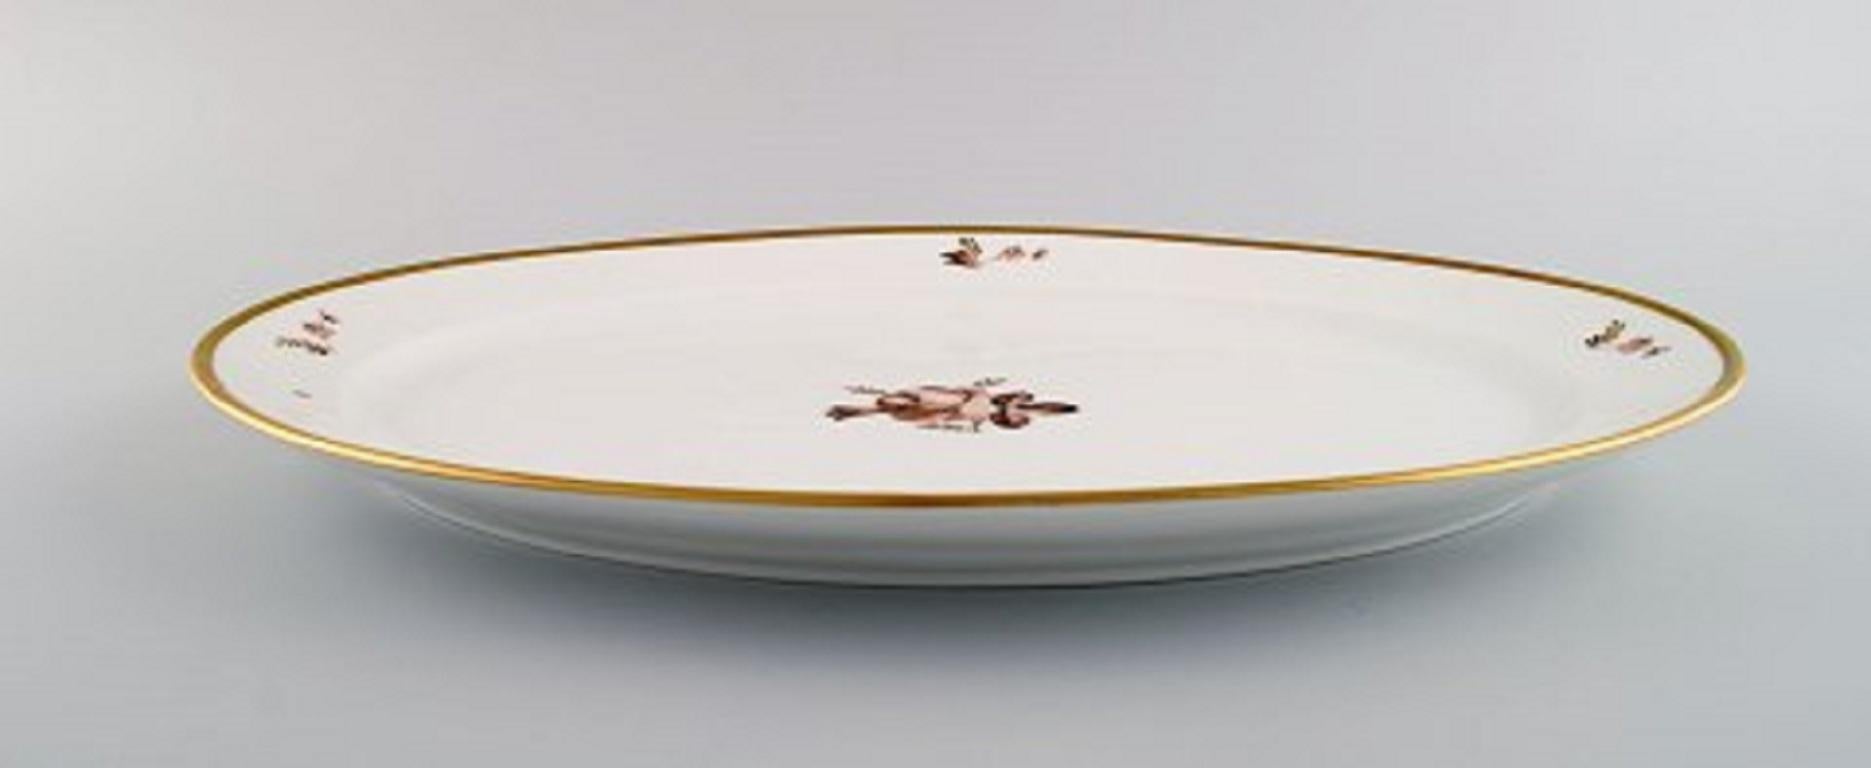 Oval Royal Copenhagen brown rose serving dish. Model number 688/9010. 
Dated 1962. 
Two dishes available.
Measures: 41 x 30 cm.
In excellent condition.
Stamped.
1st factory quality.